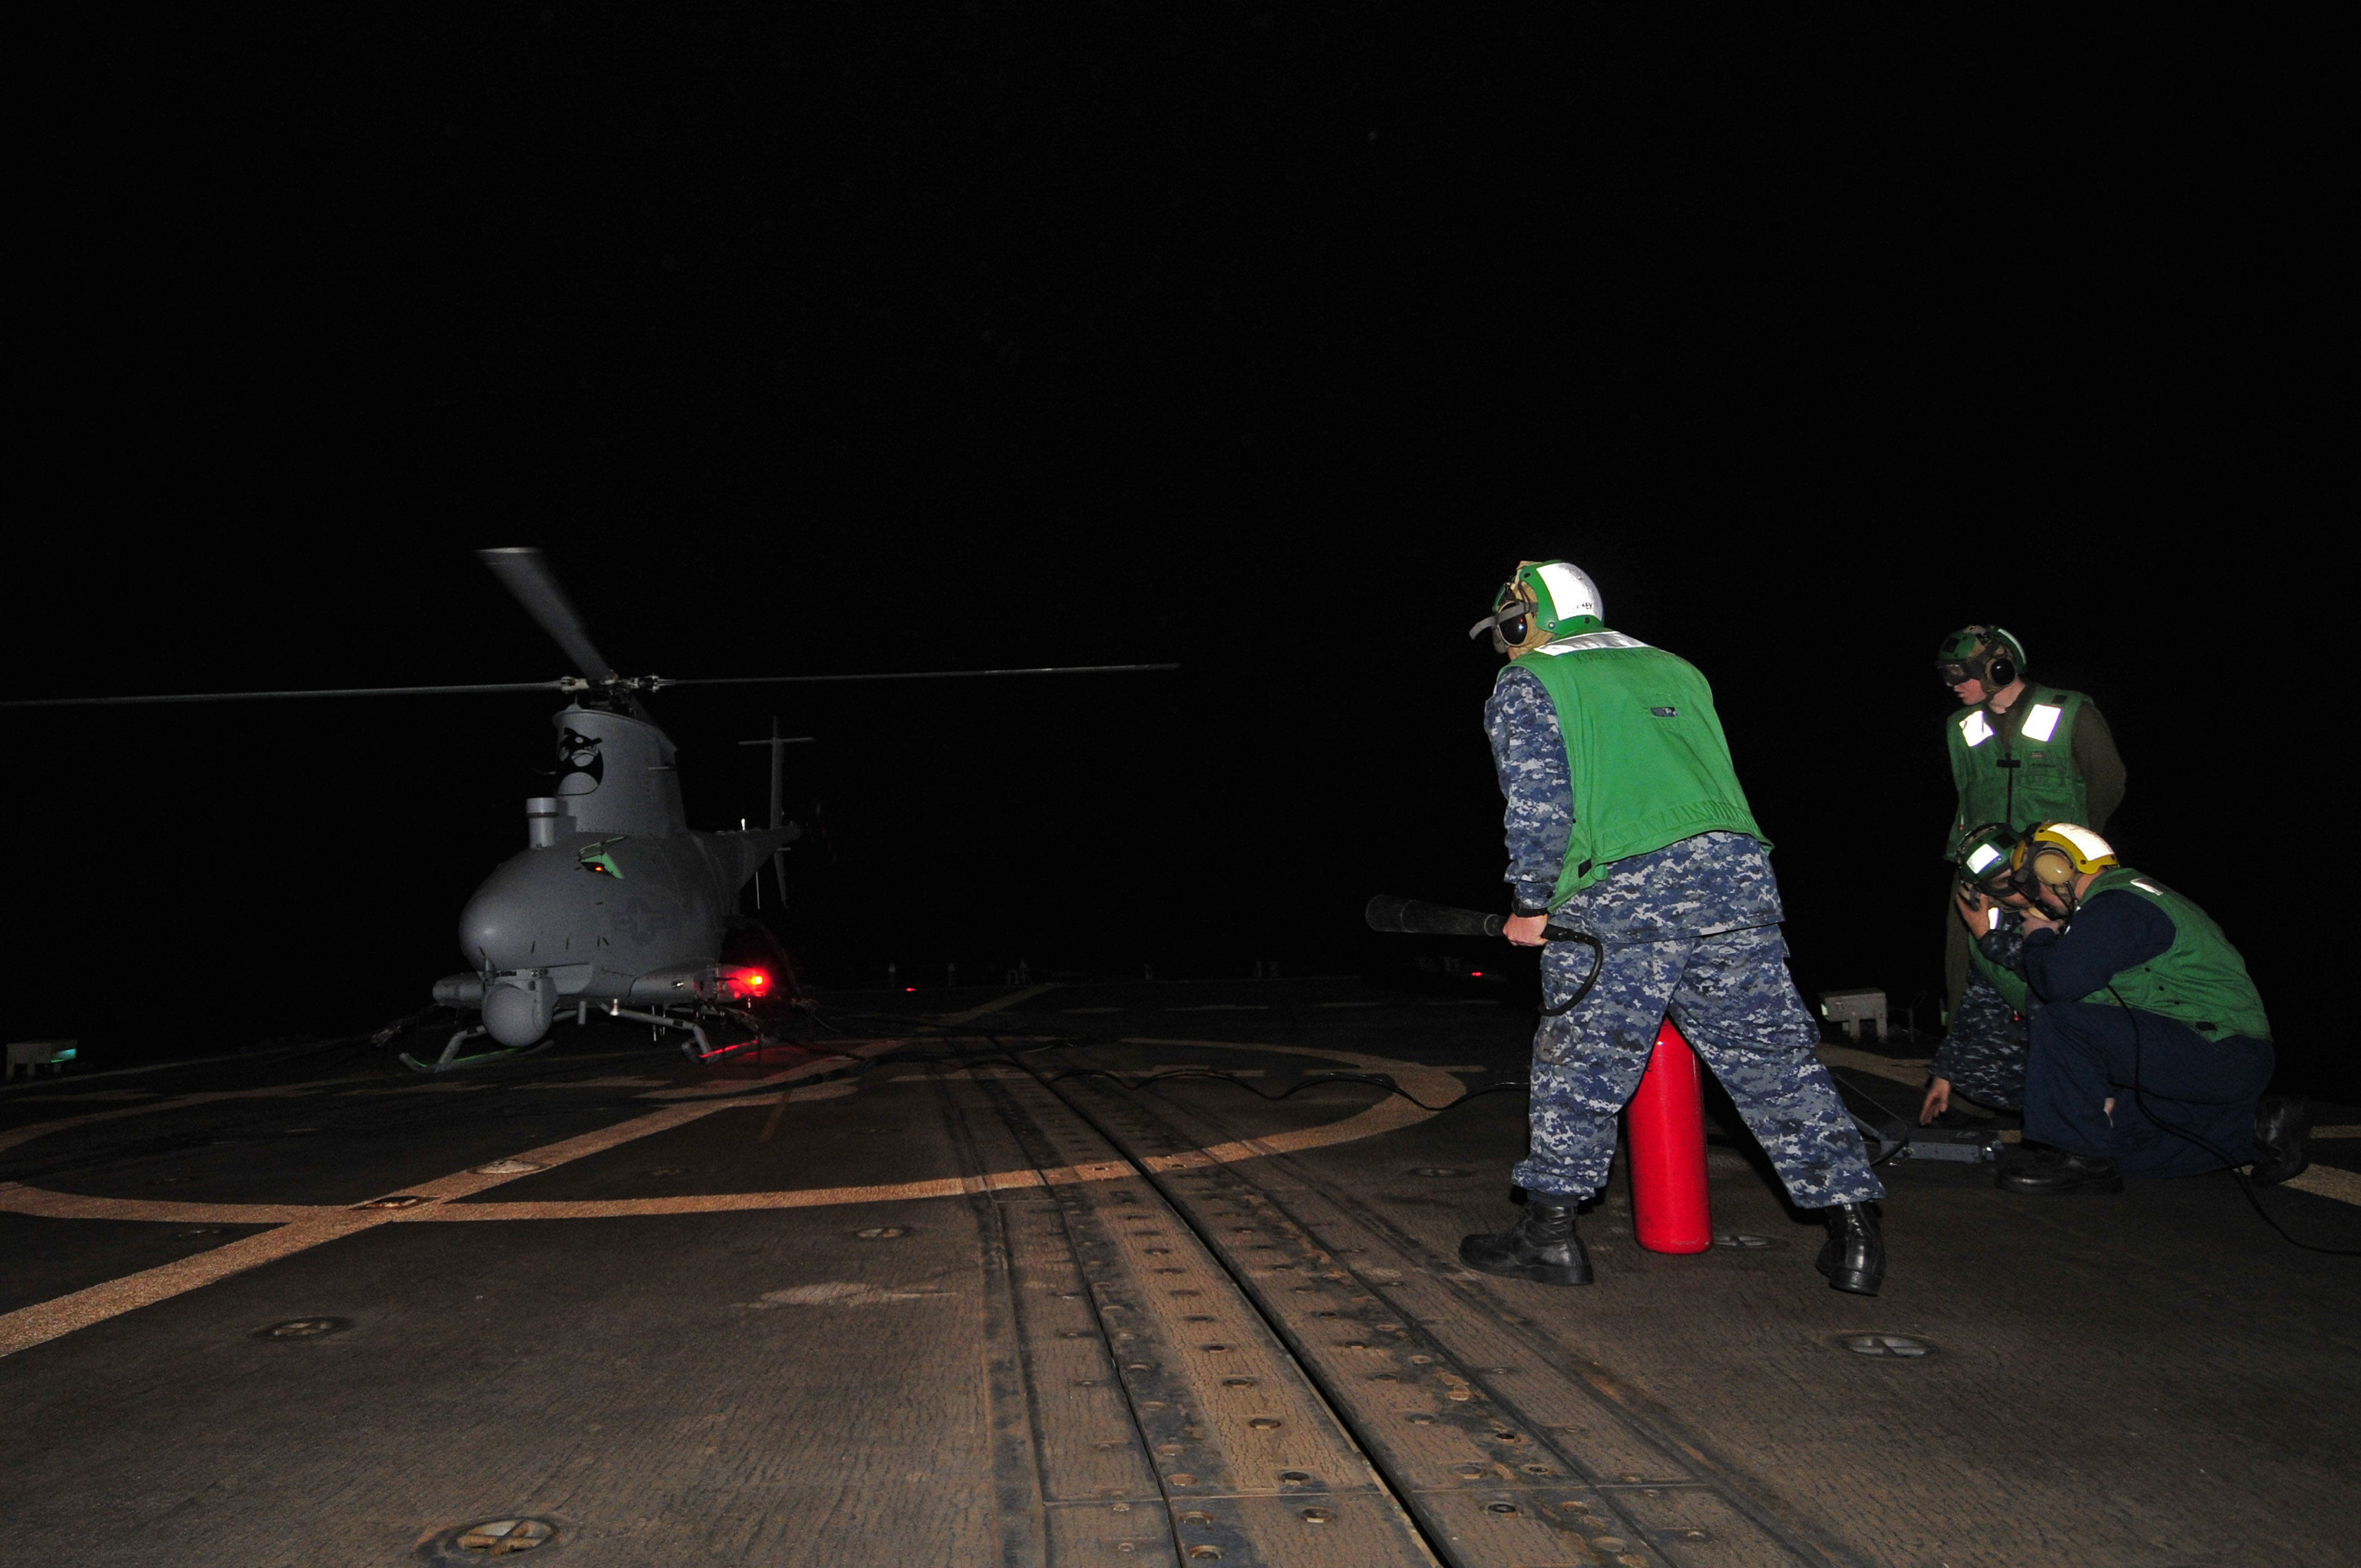 US Navy 120208-N-IZ292-062 Sailors prepare to launch an MQ-8B Fire Scout unmanned aerial vehicle (UAV) during nighttime flight operations aboard th